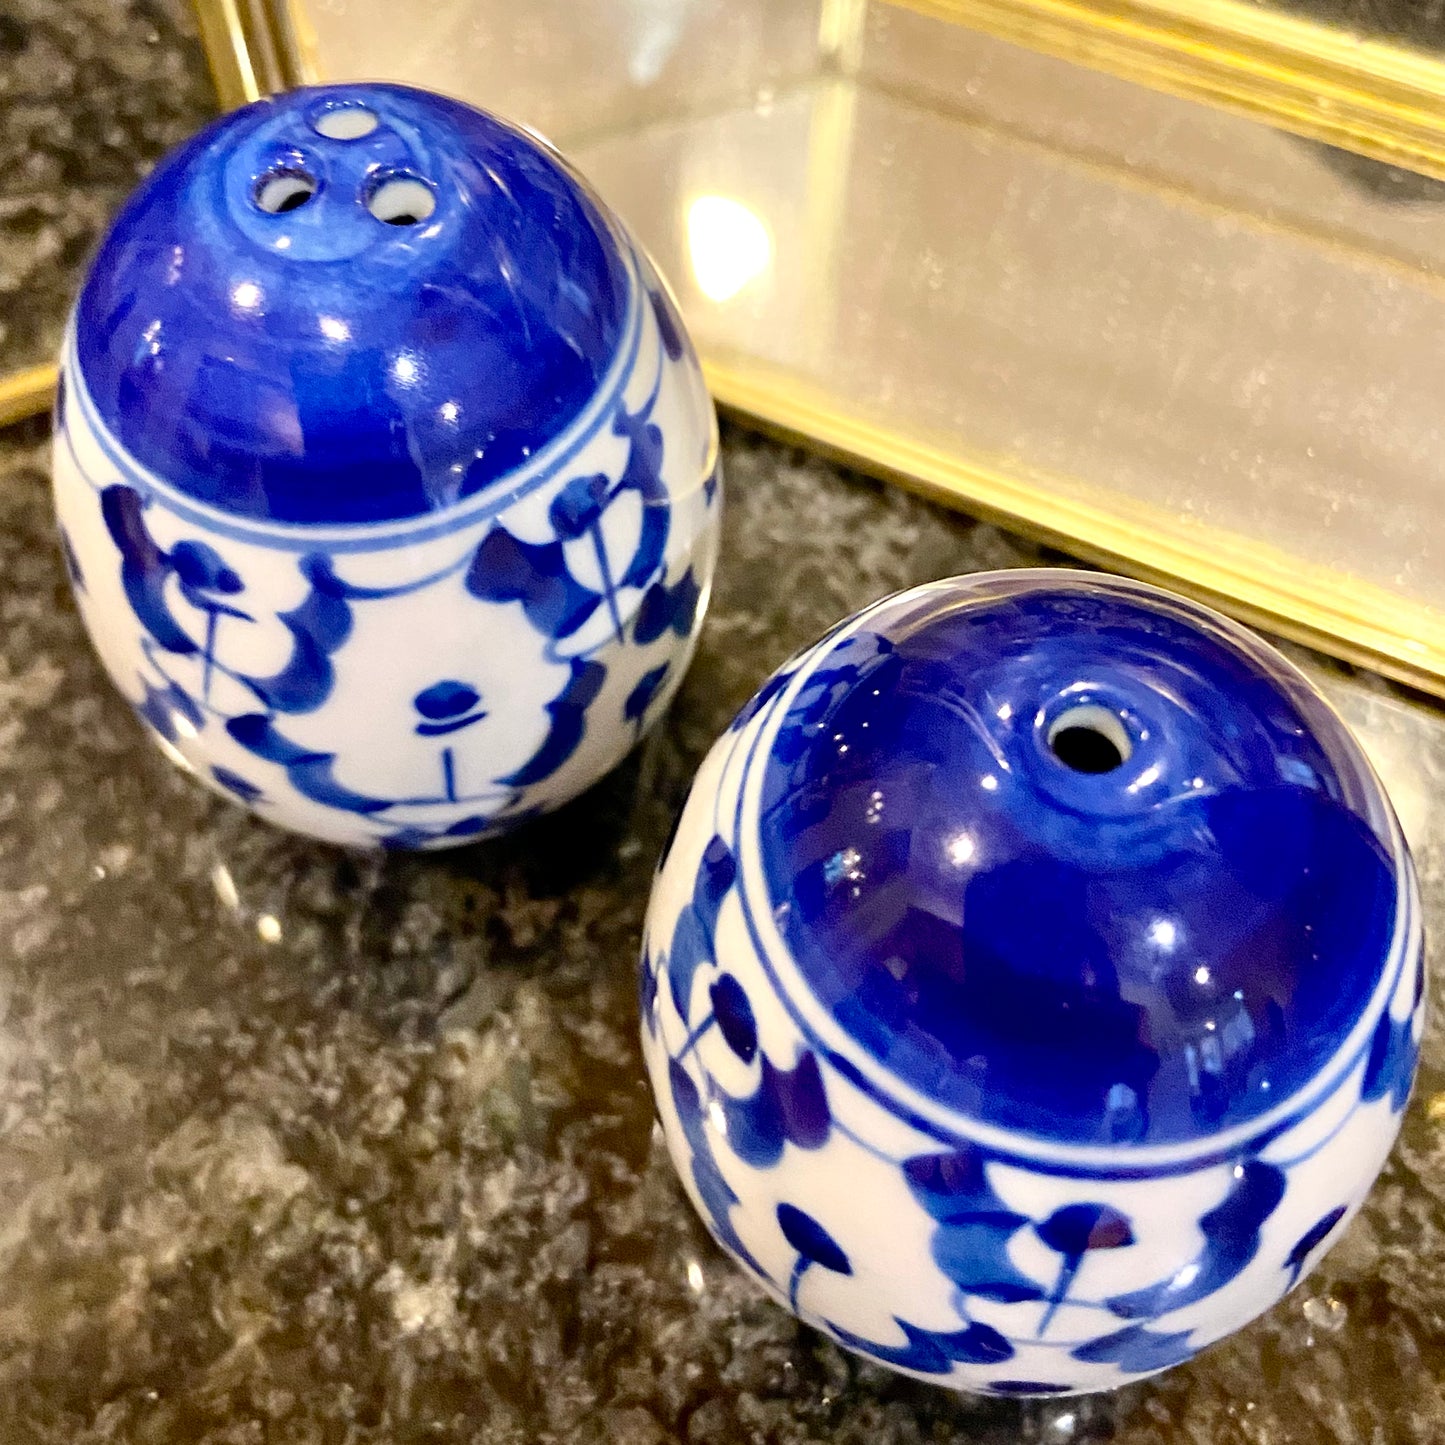 Charming pair of vintage blue and white salt & pepper shakers